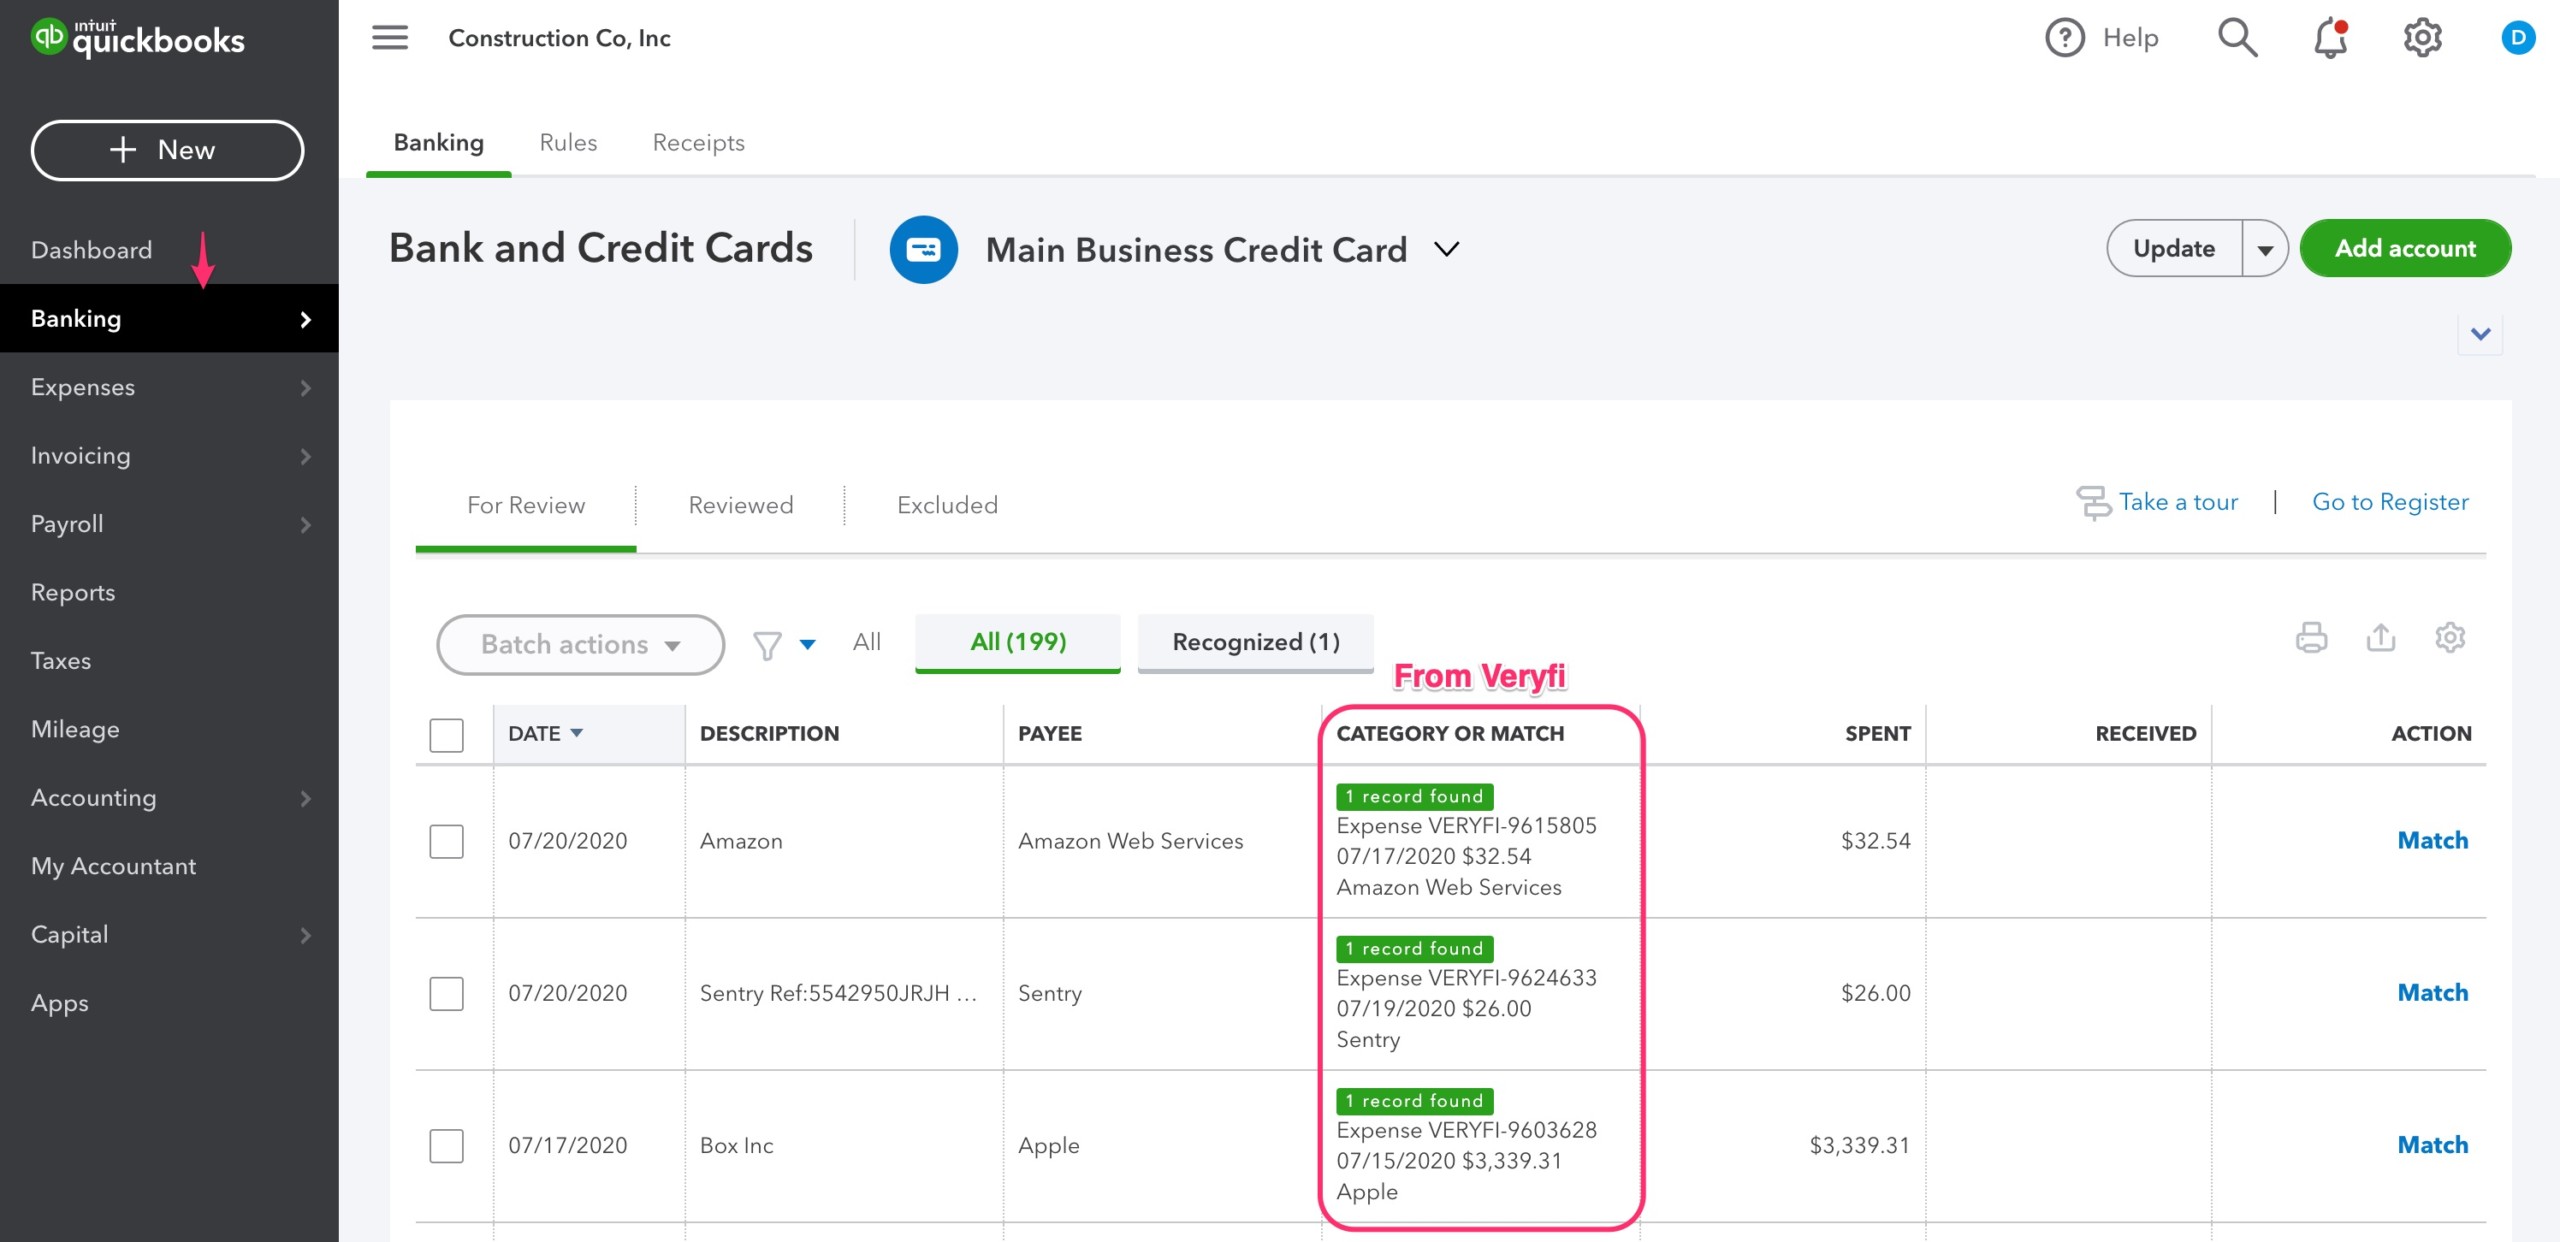 match expenses from Veryfi to bank transactions in quickbooks 